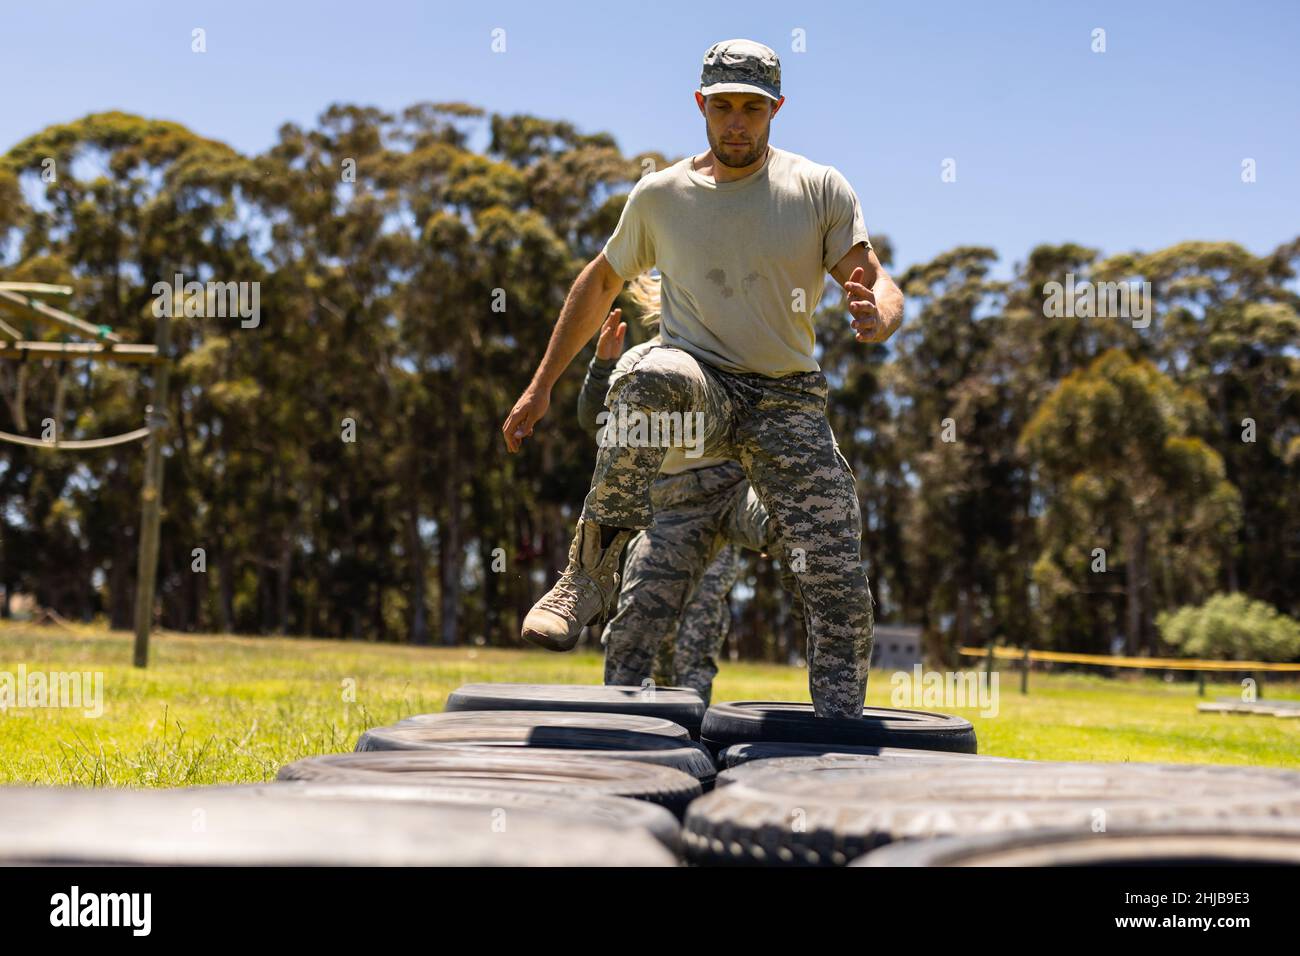 Caucasian male soldier walking on tires during obstacle course at